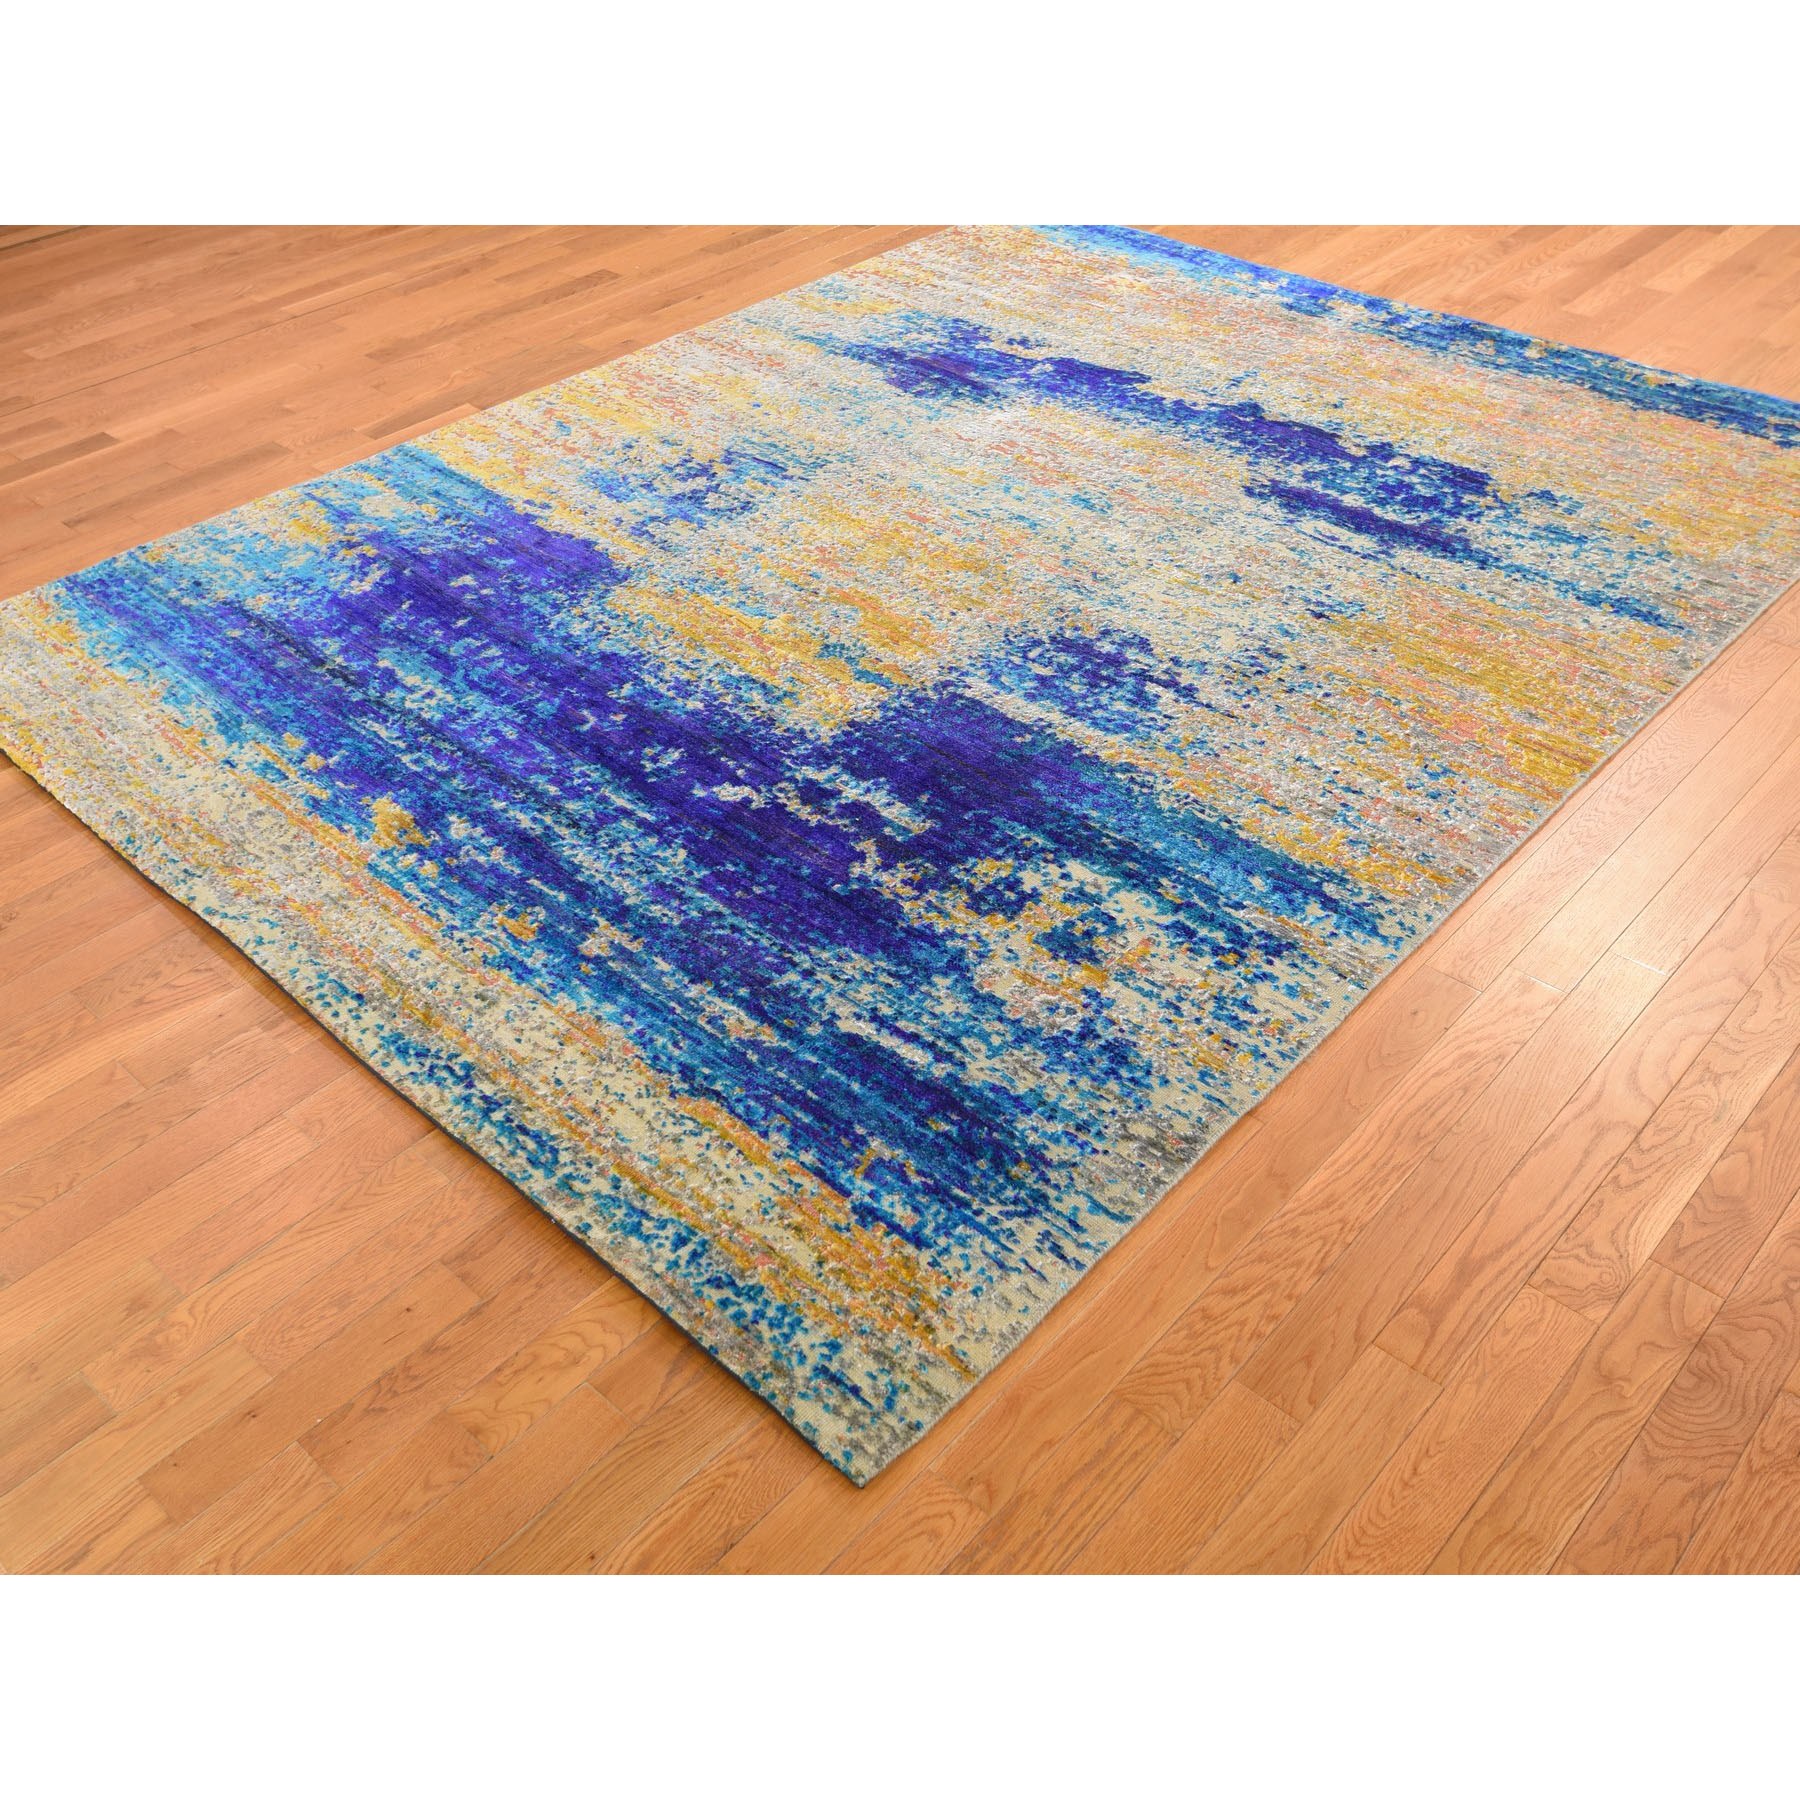 7-10 x10- Yellow Sari Silk With Textured Wool Abstract Hand Knotted Oriental Rug 